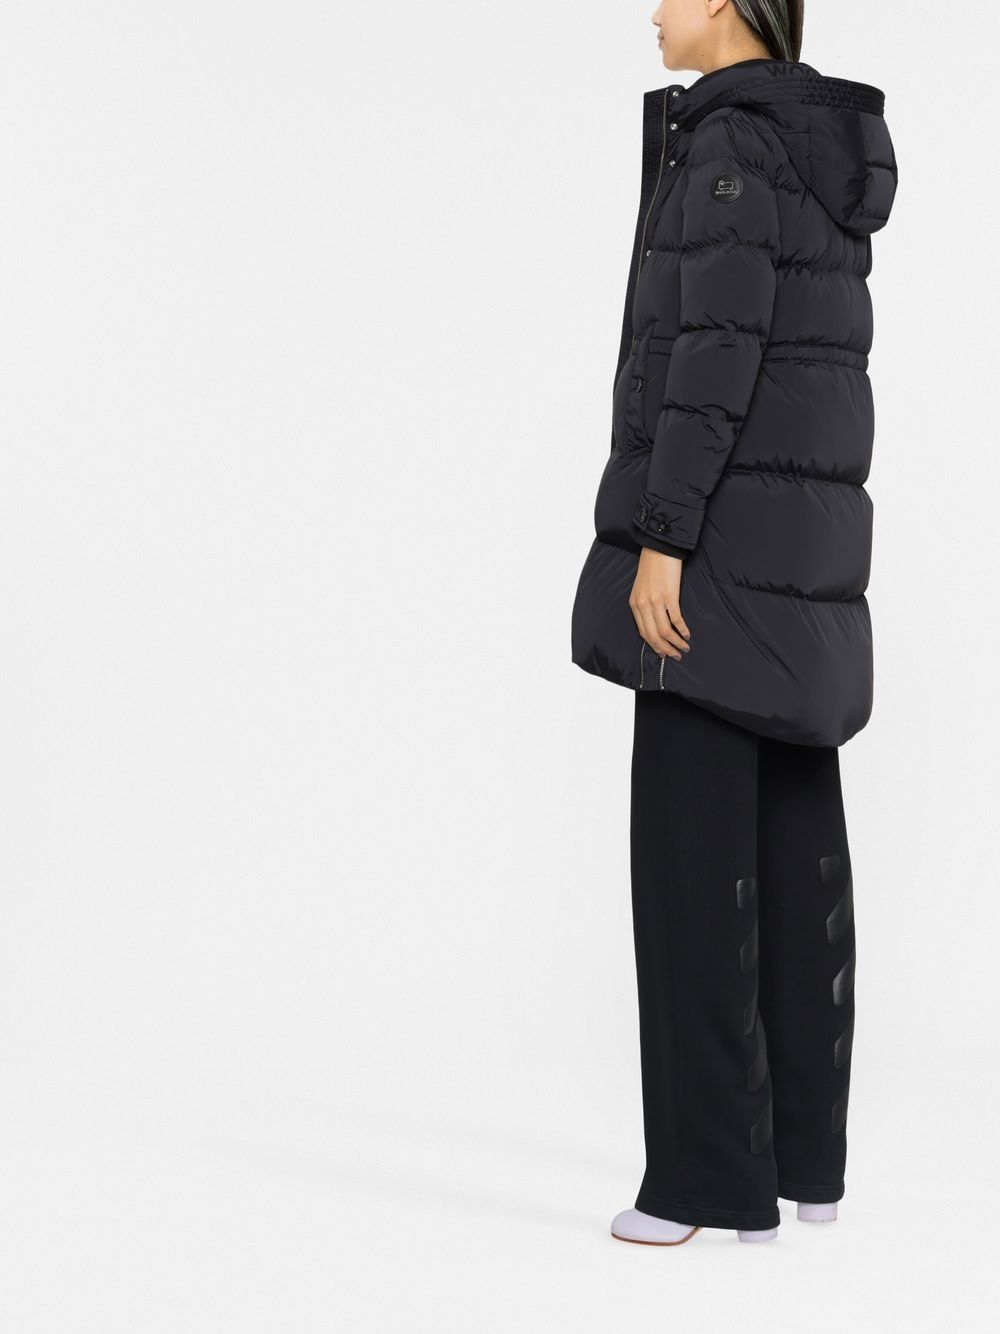 WOOLRICH Black Down Puffer Jacket with Hood for Women - FW23 Collection